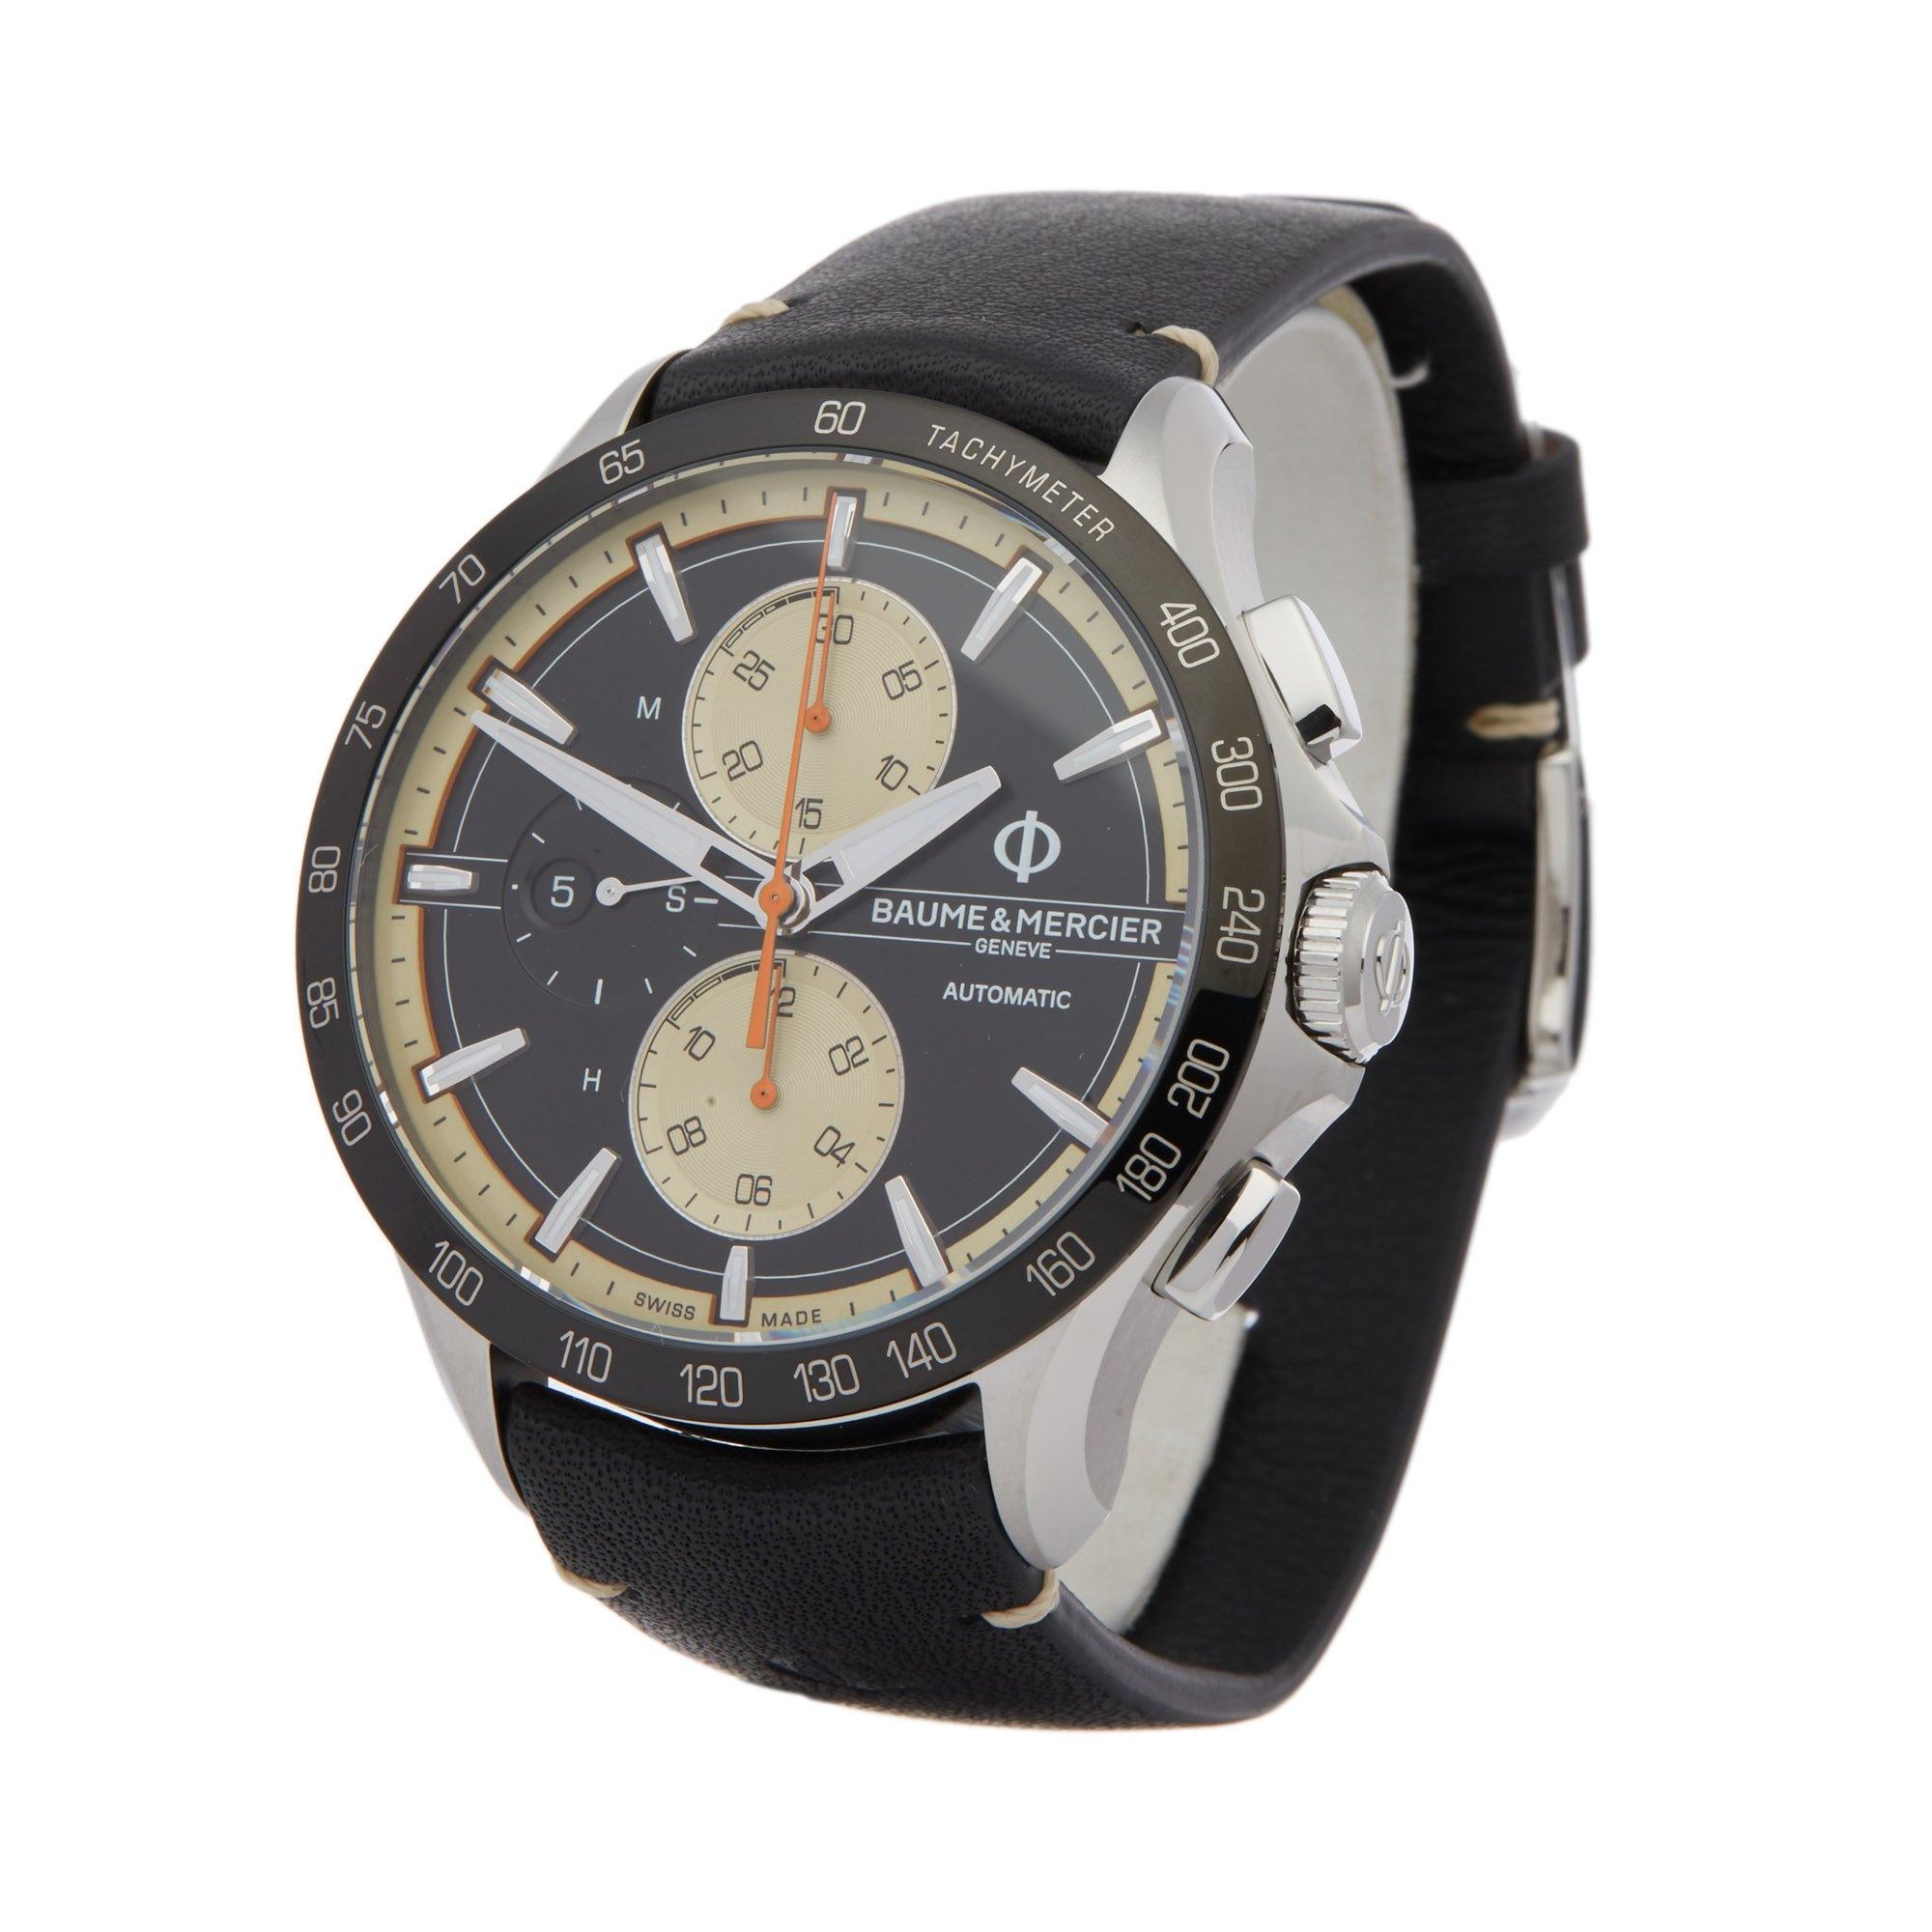 Xupes Reference: COM002532
Manufacturer: Baume & Mercier
Model: Clifton
Model Variant: Club
Model Number: M0A10434
Age: 2020
Gender: Men
Complete With: Baume & Mercier Box, Manuals & Open Guarantee
Dial: Black Baton
Glass: Sapphire Crystal
Case